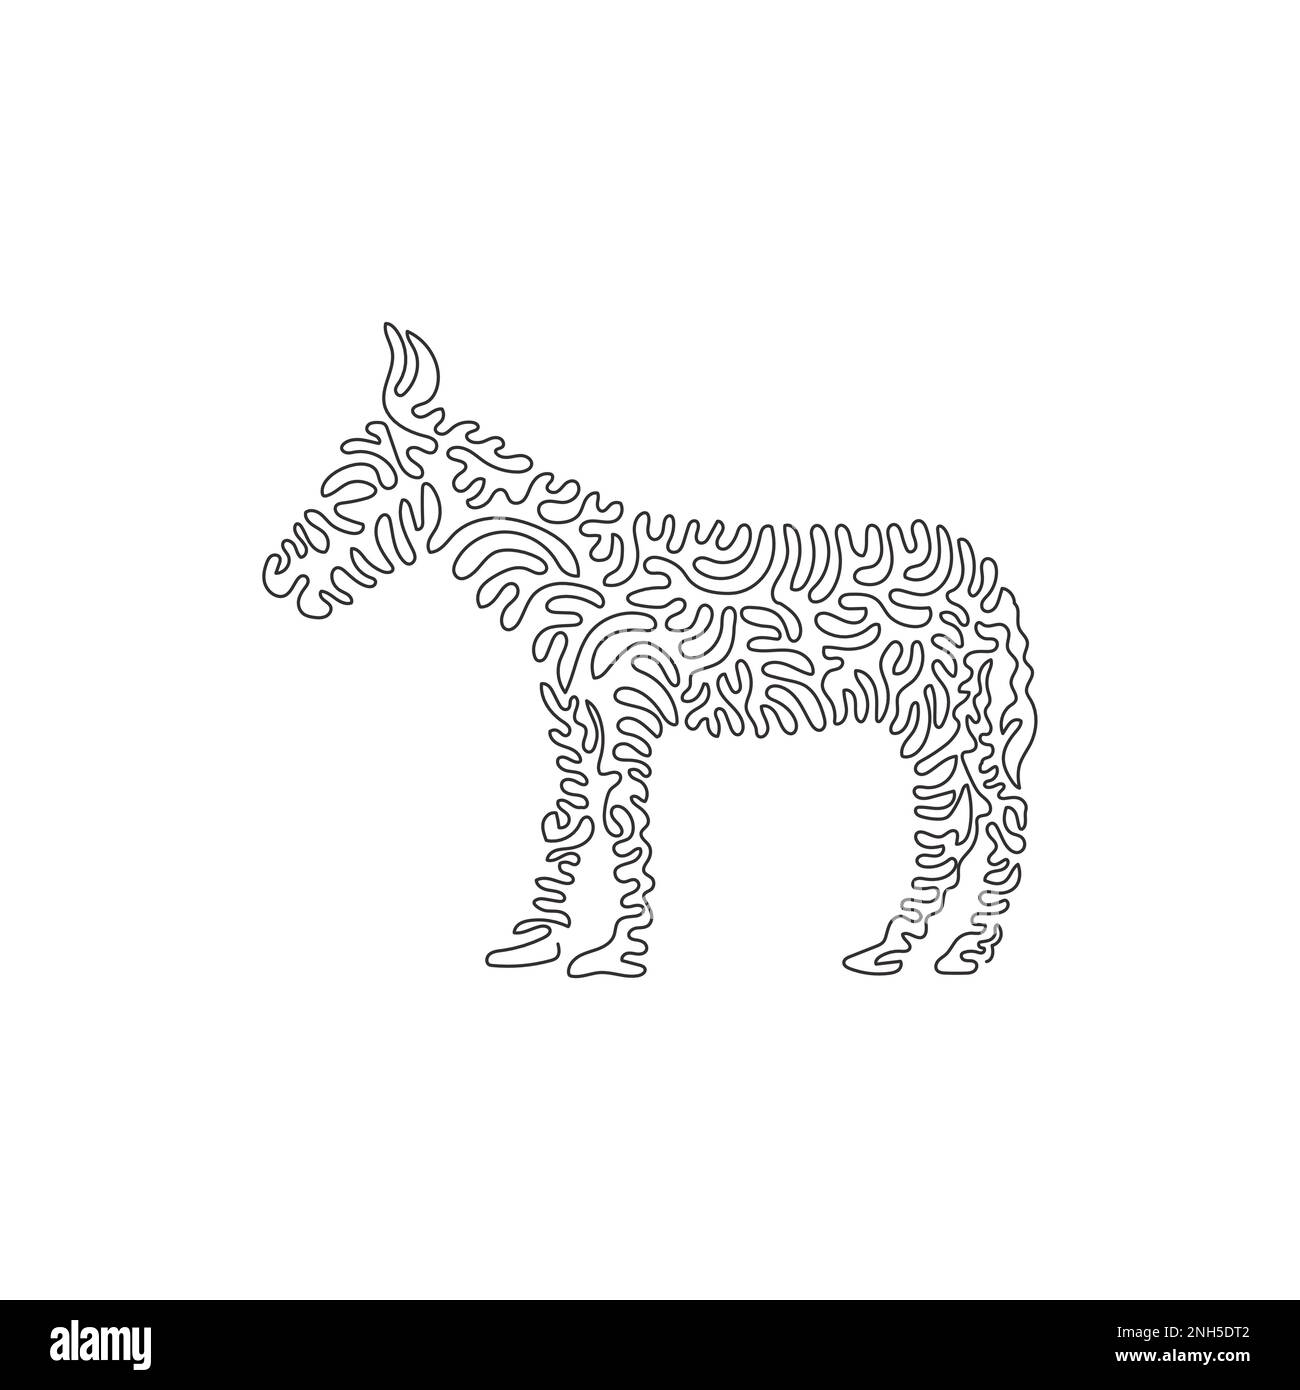 Single one line drawing of a cute donkey standing. Continuous line drawing design vector illustration of friendly domesticated donkey Stock Vector